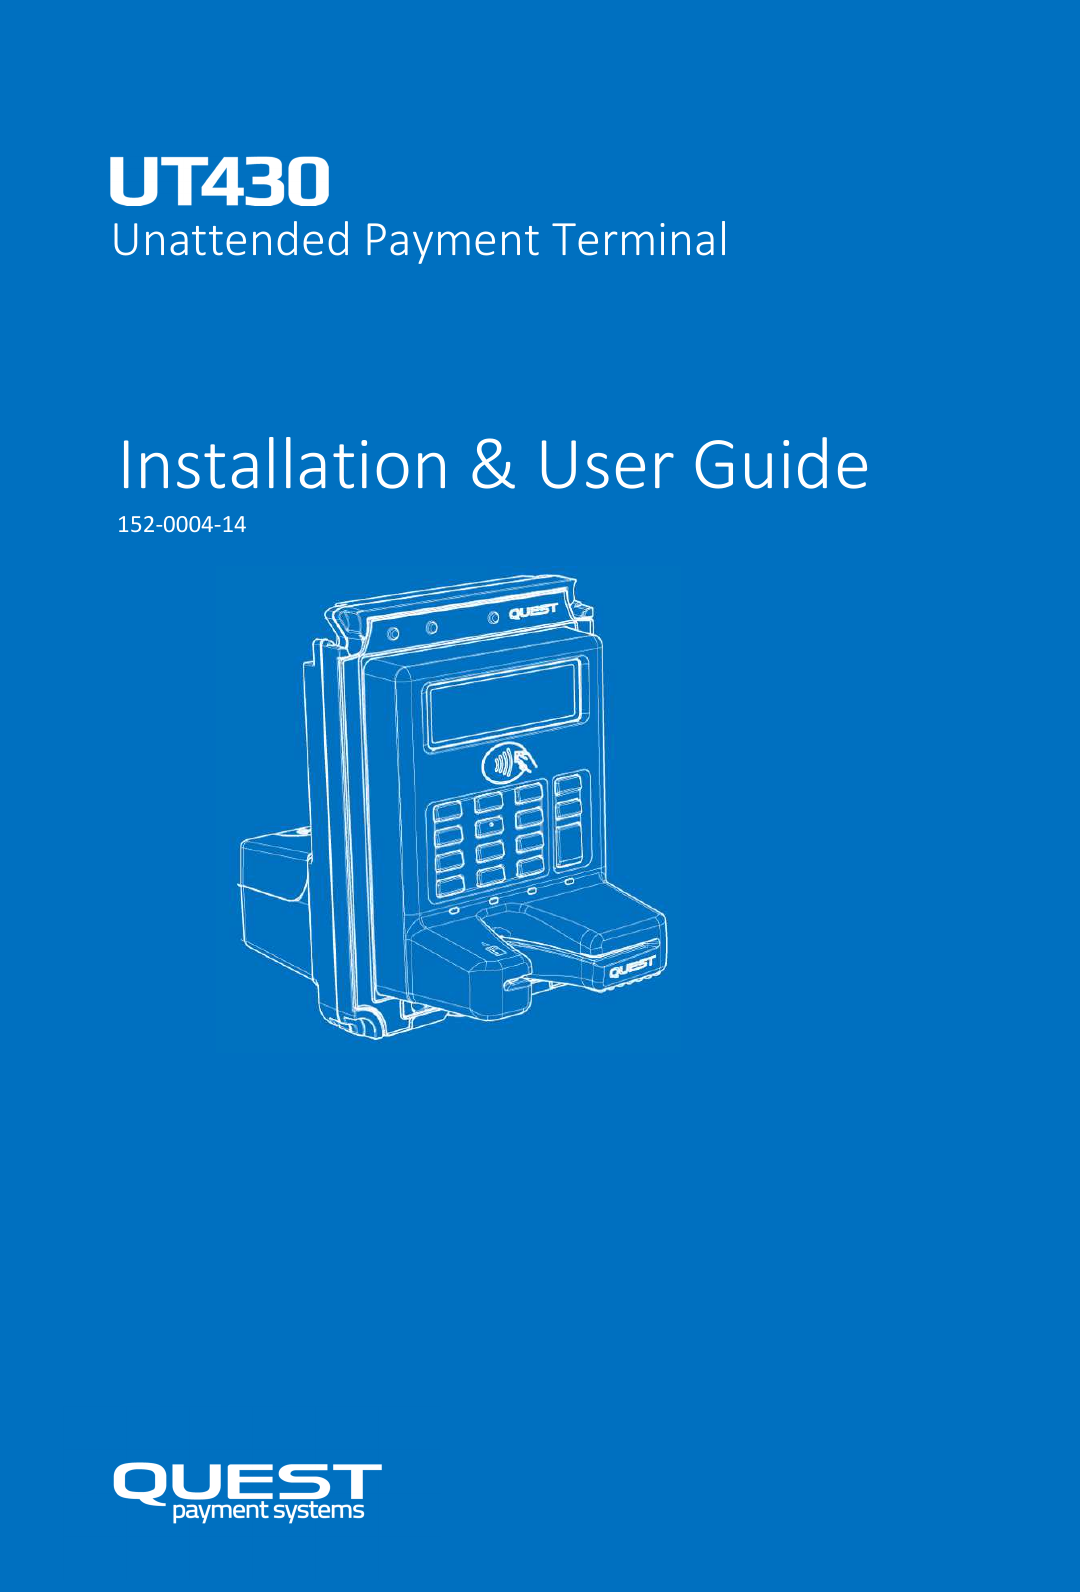       Unattended Payment Terminal  Installation &amp; User Guide 152-0004-14  